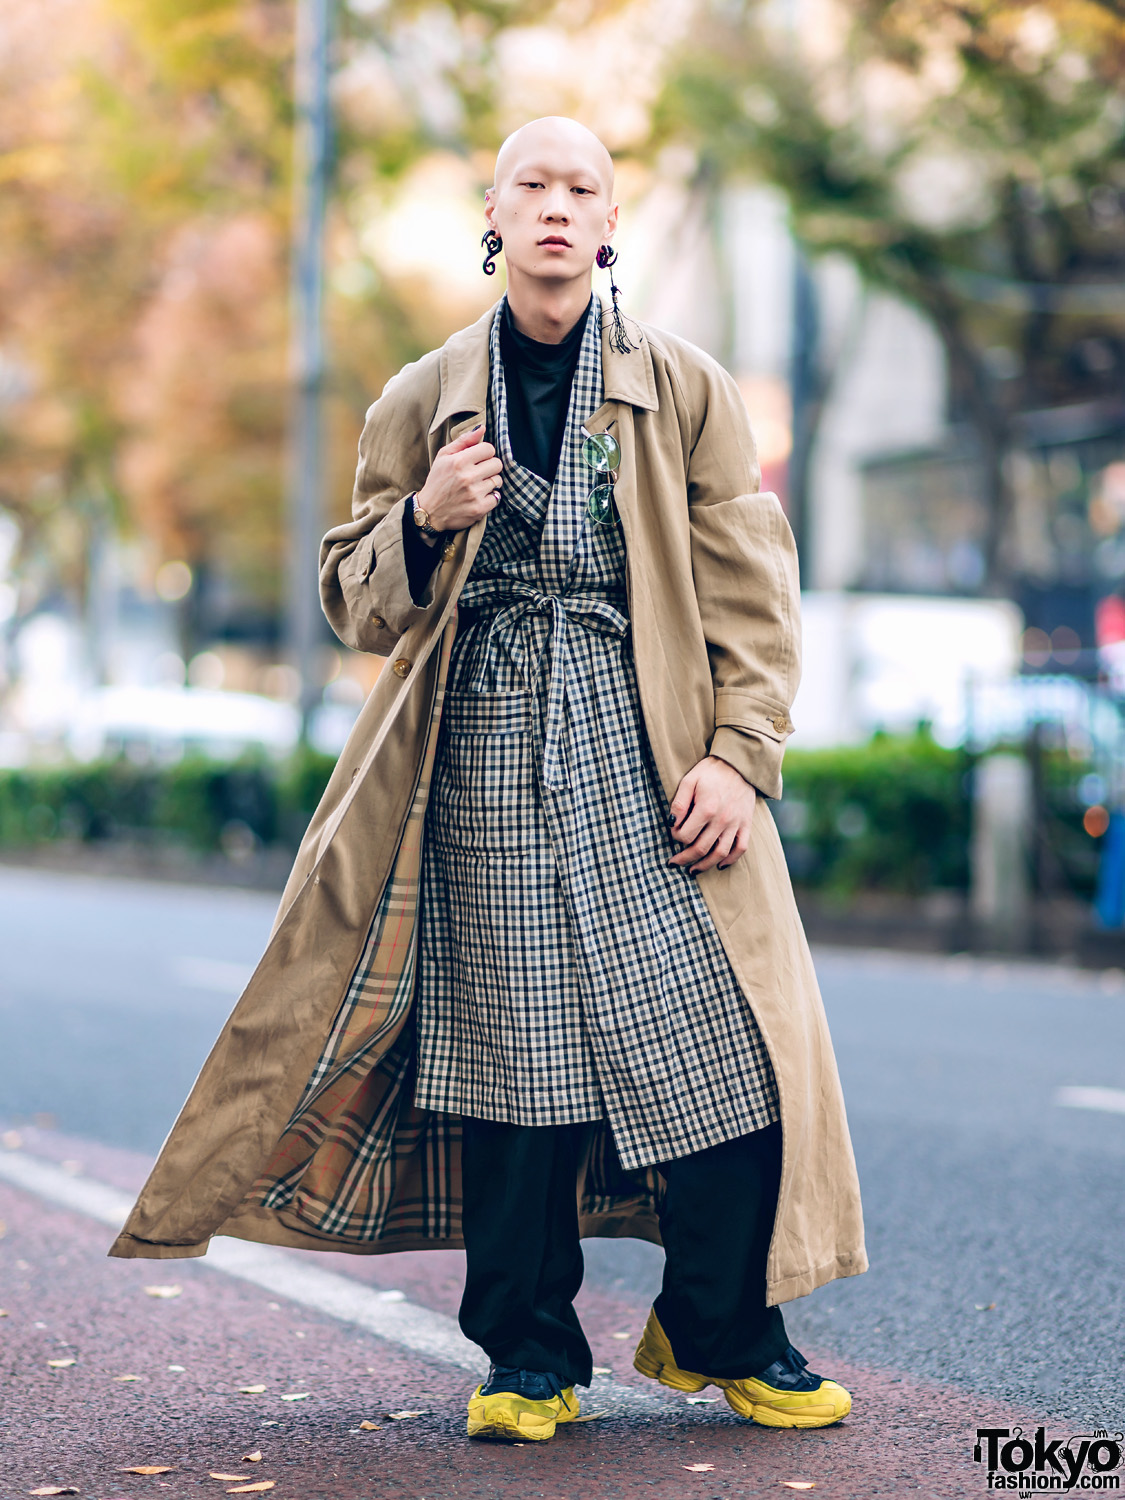 Japanese Model & Musician in Layered Outerwear Street Style w/ Burberry Coat, Plaid Liner, Face Shirt & Raf Simons Sneakers